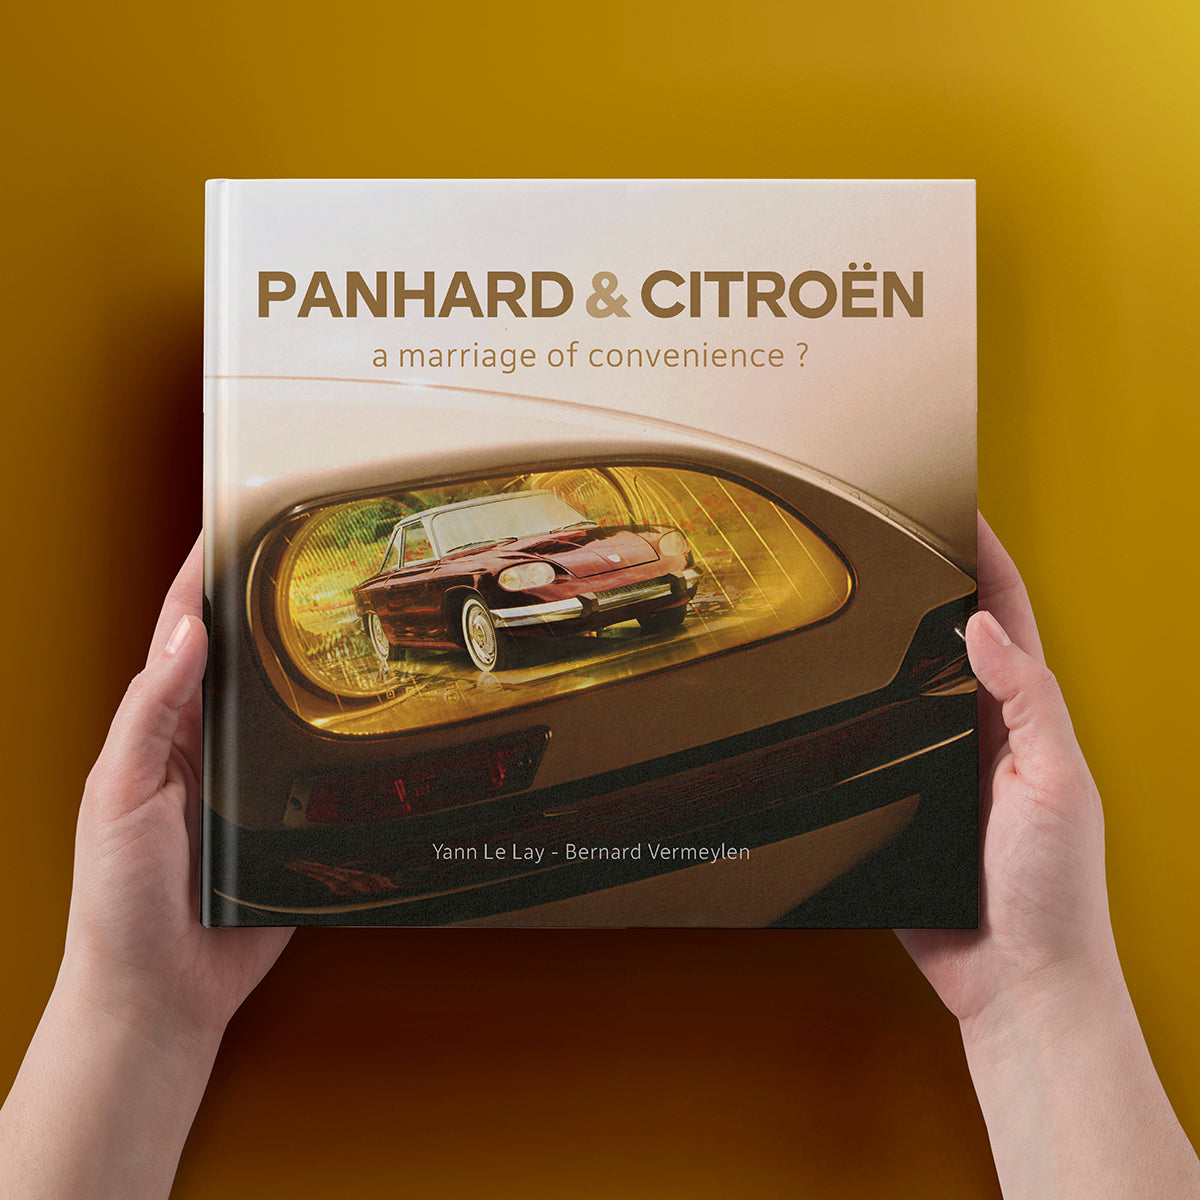 Panhard & Citroën - a marriage of convenience ?